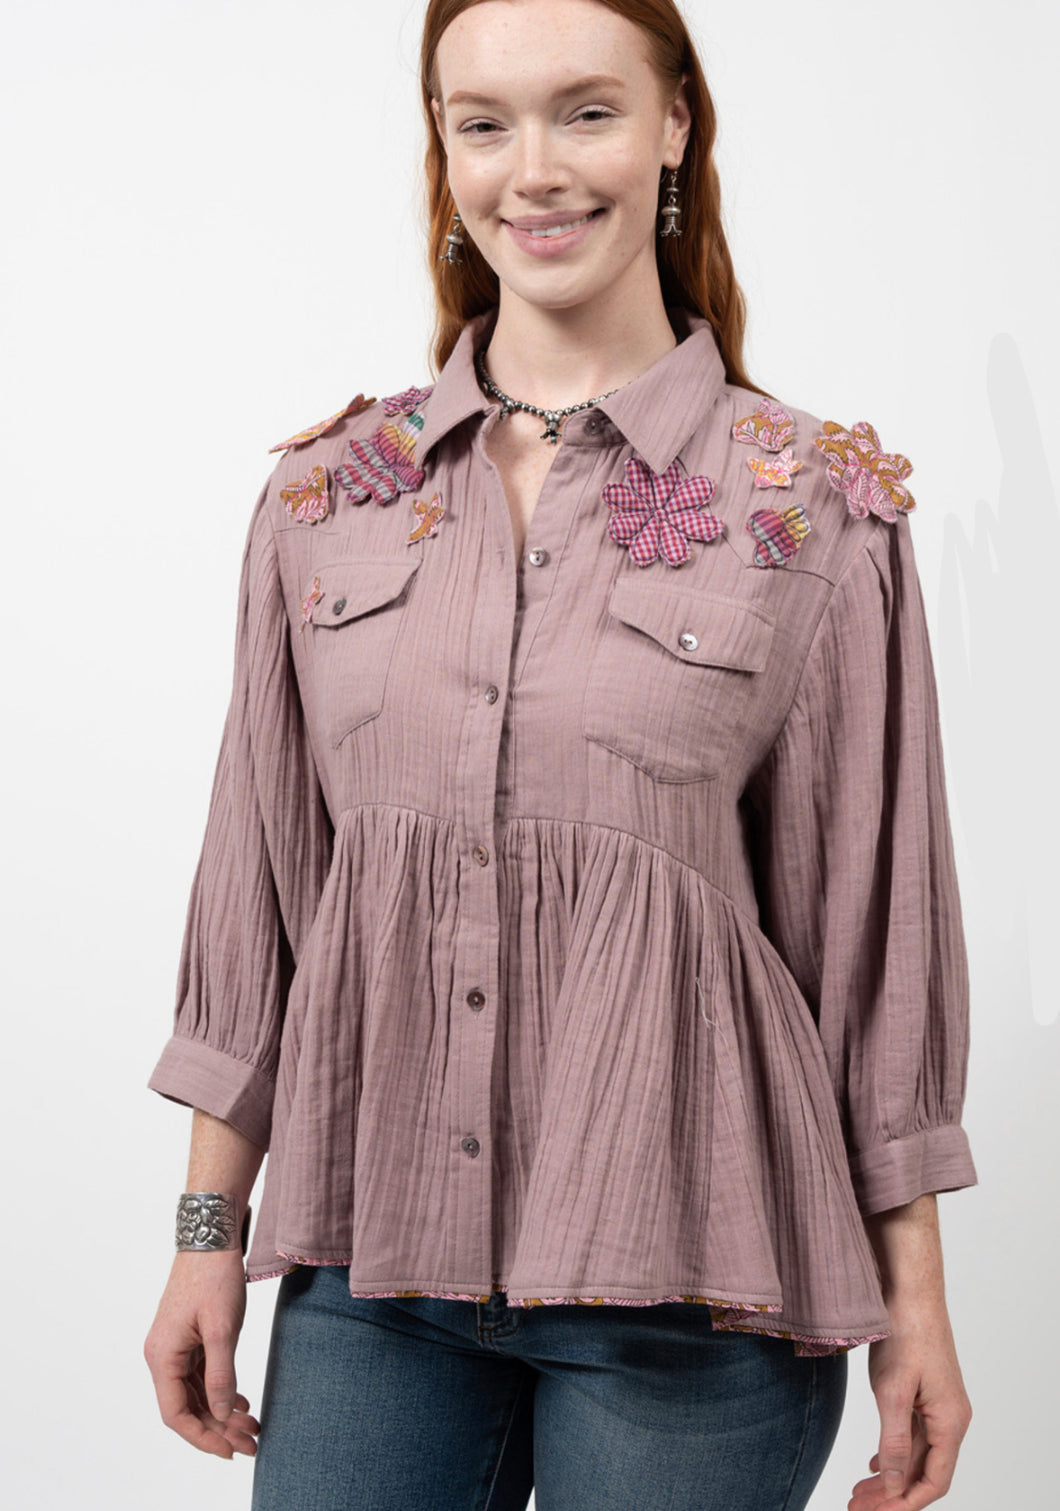 Ivy Jane: Carrying Flowers Peplum Top in Mauve